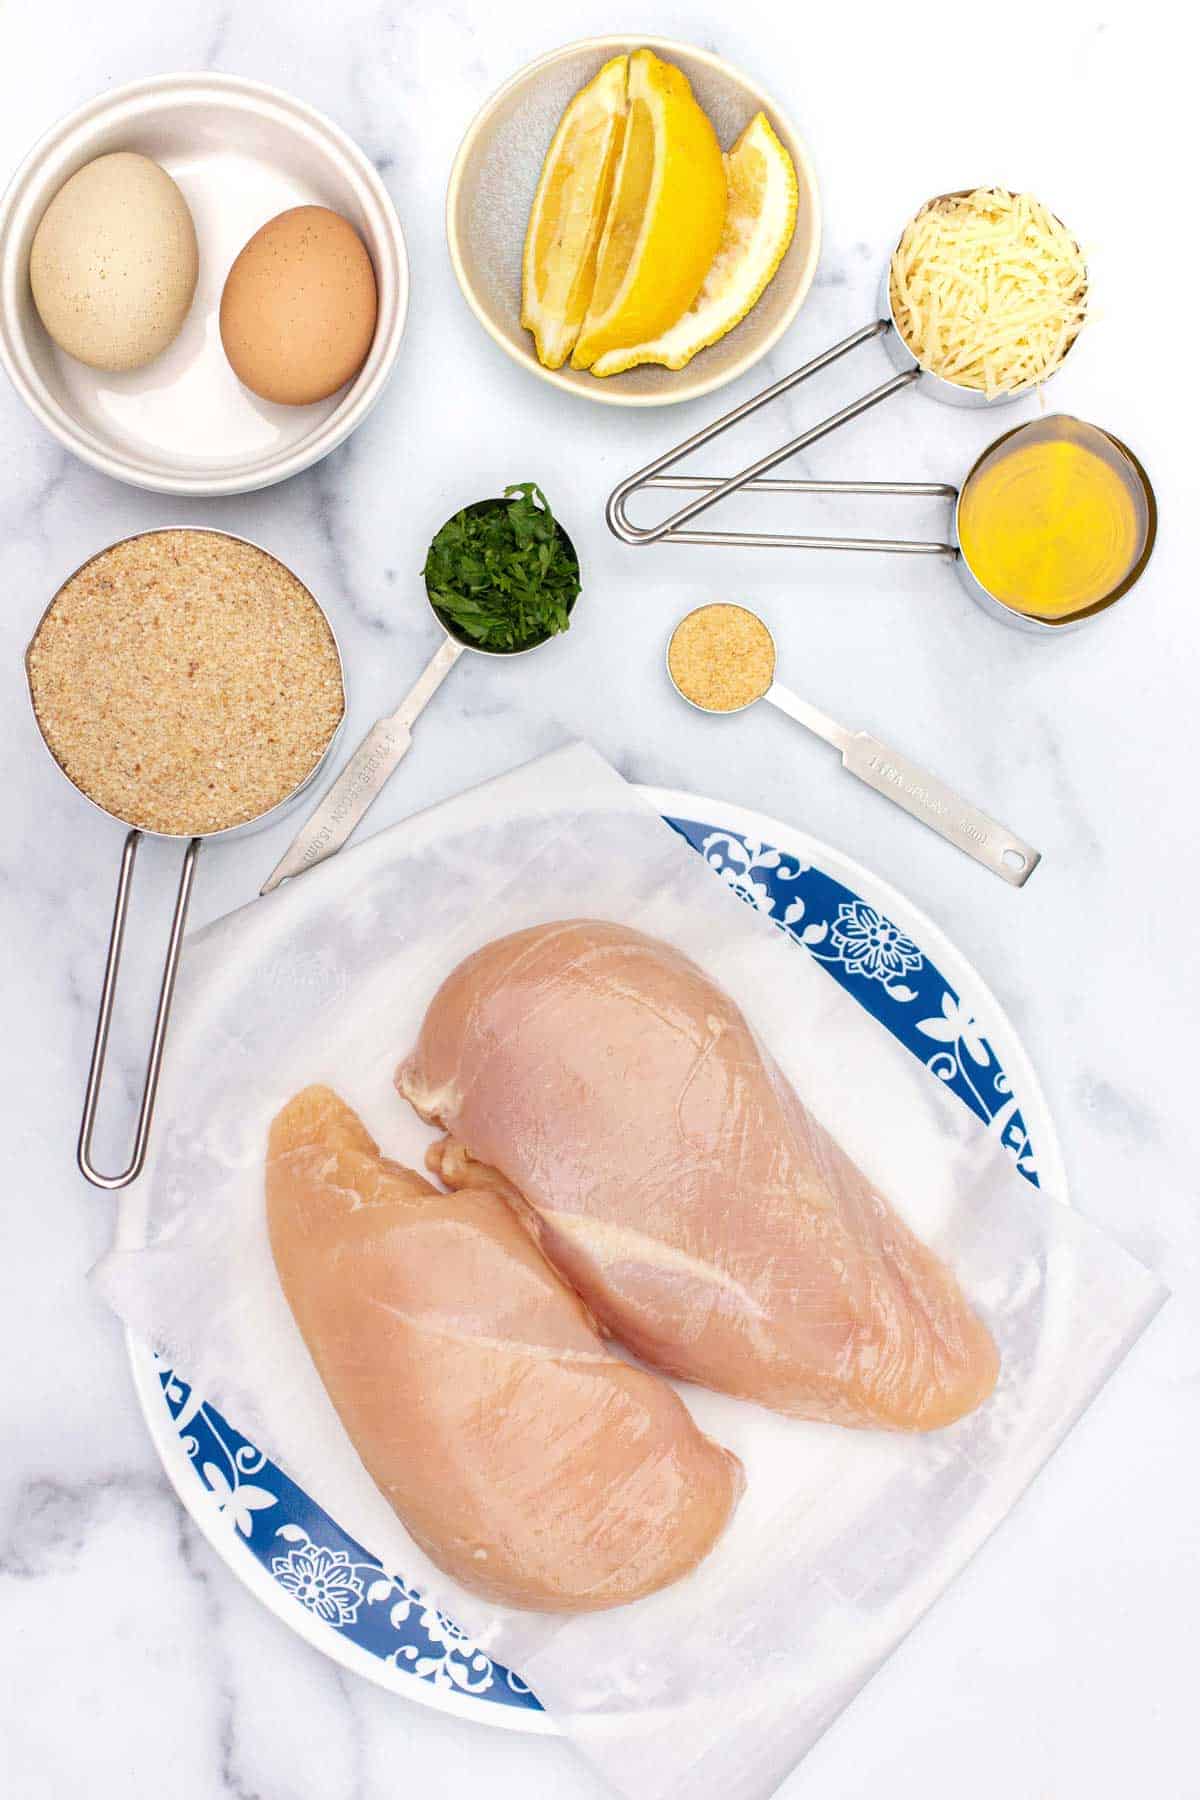 Italian chicken cutlet ingredients: raw chicken breasts, bread crumbs, parmesan, eggs, parsley, onion powder, olive oil, and lemon wedges.